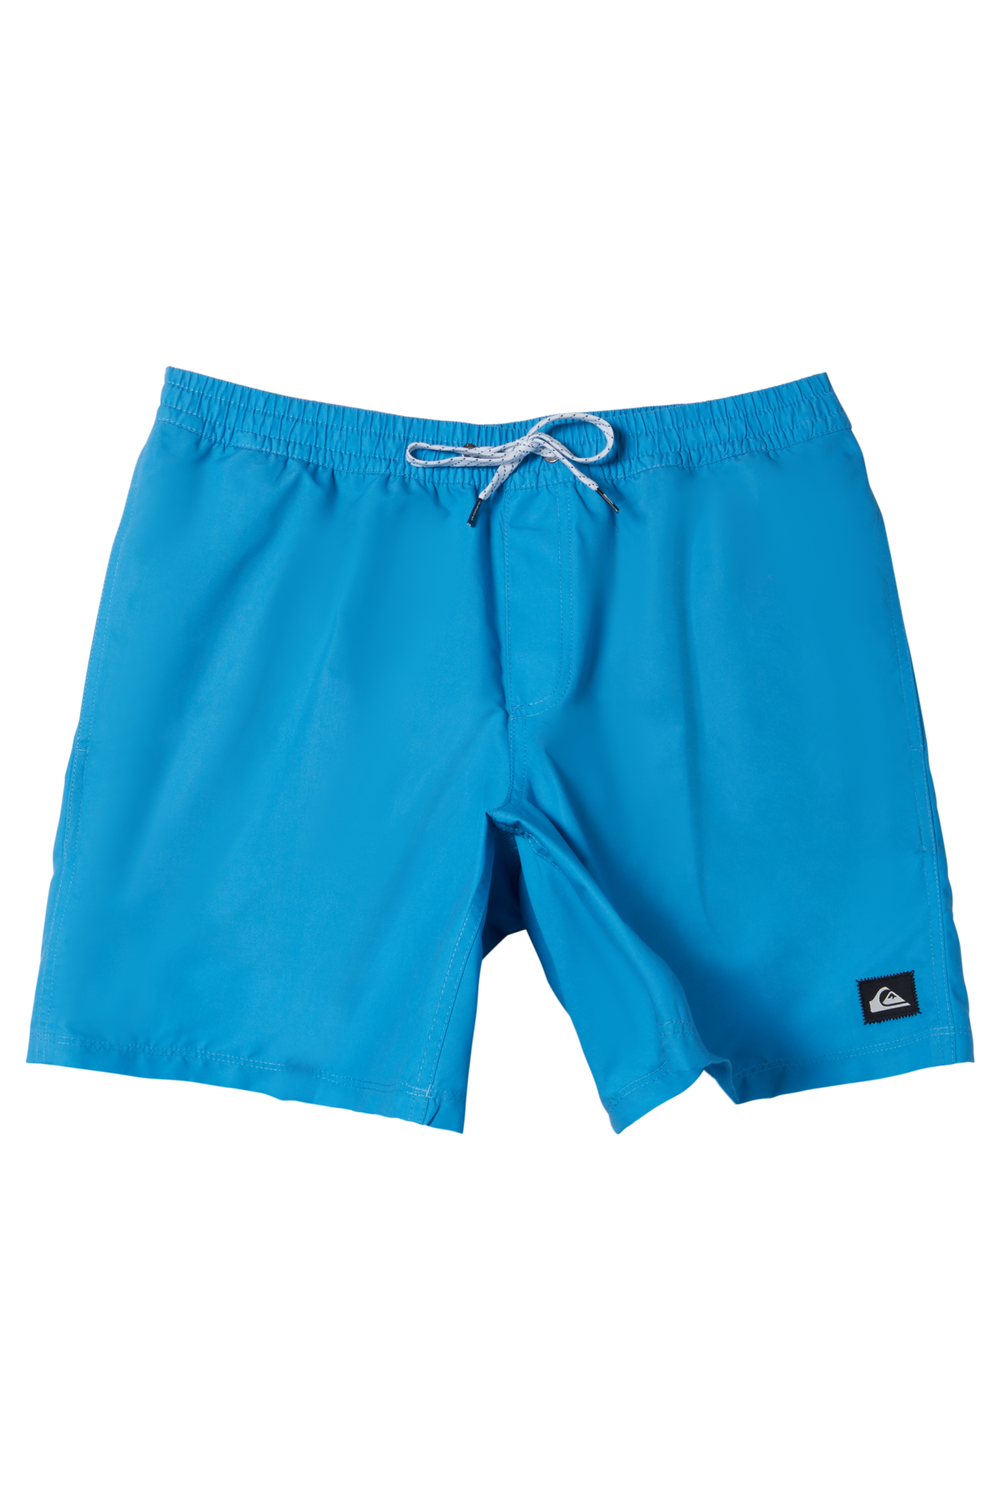 Quiksilver Everyday Solid Volley Youth 14" Colonial Blue